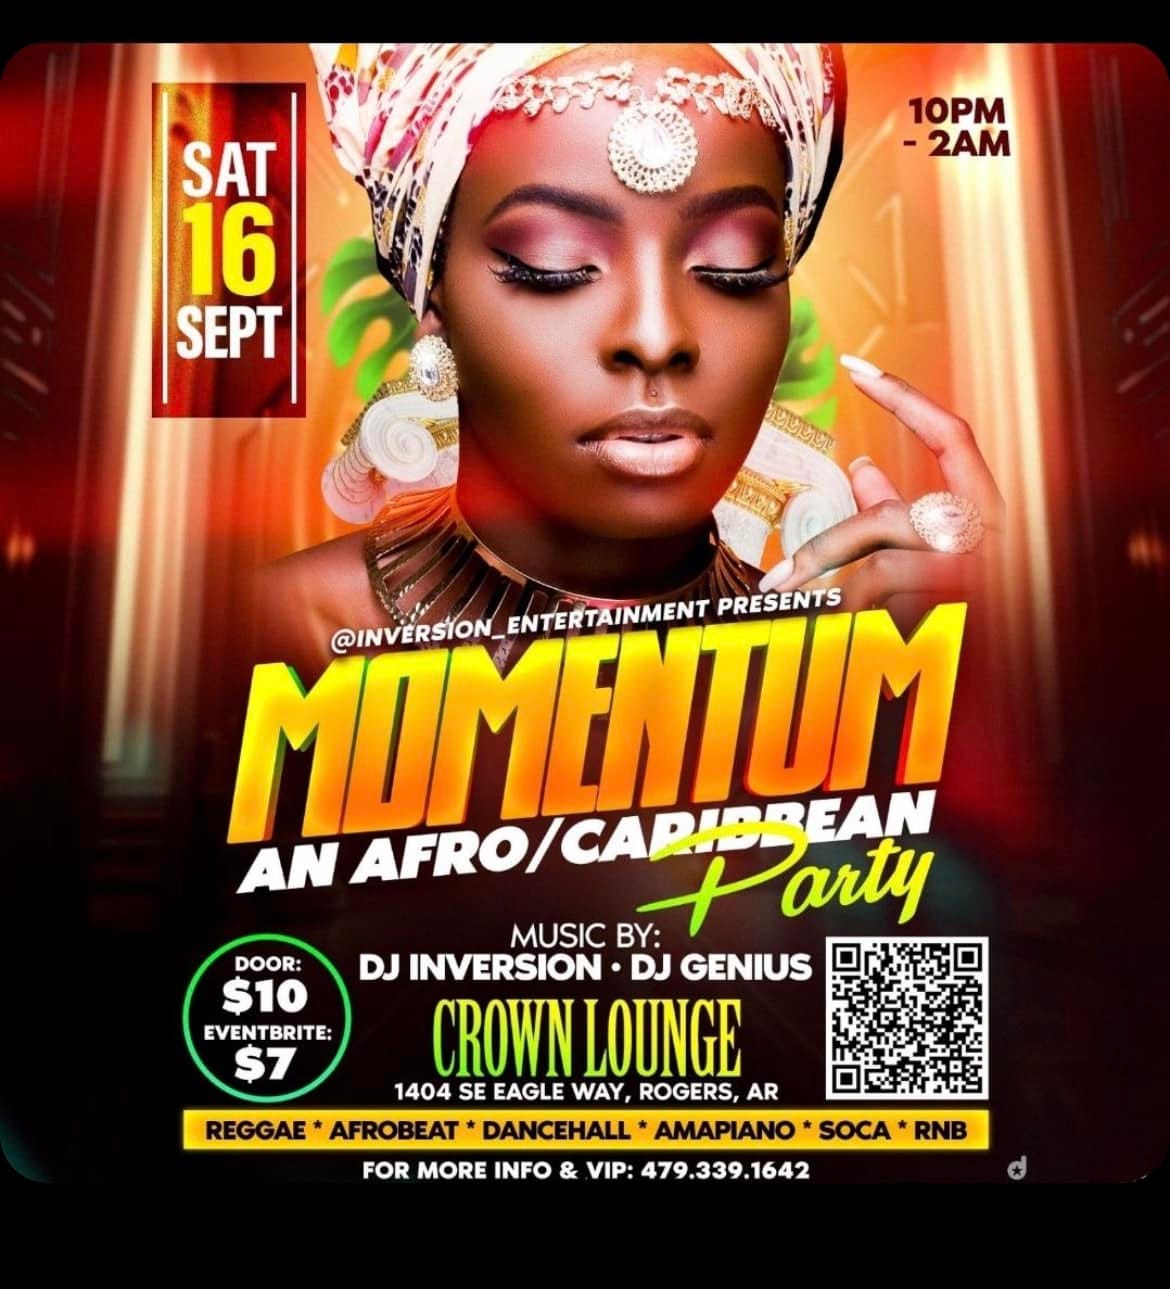 May be an image of 1 person and text that says '10PM -2AM SAT 16 SEPT ভভততা DOOR: $10 EVENTBRITE: $7 MOMENTUM @INVERSION ENTERTAINMENT PRESENTS AN AFRO/ MUSIC CAPParty BY: DJ INVERSION DJ GENIUS CROWN LOUNGE 1404 SE EAGLE WAY, ROGERS, AR REGGAE AFROBEAT DANCEHALL AMAPIANO SOCA RNB FOR MORE INFO & VIP: 479.339.1642'